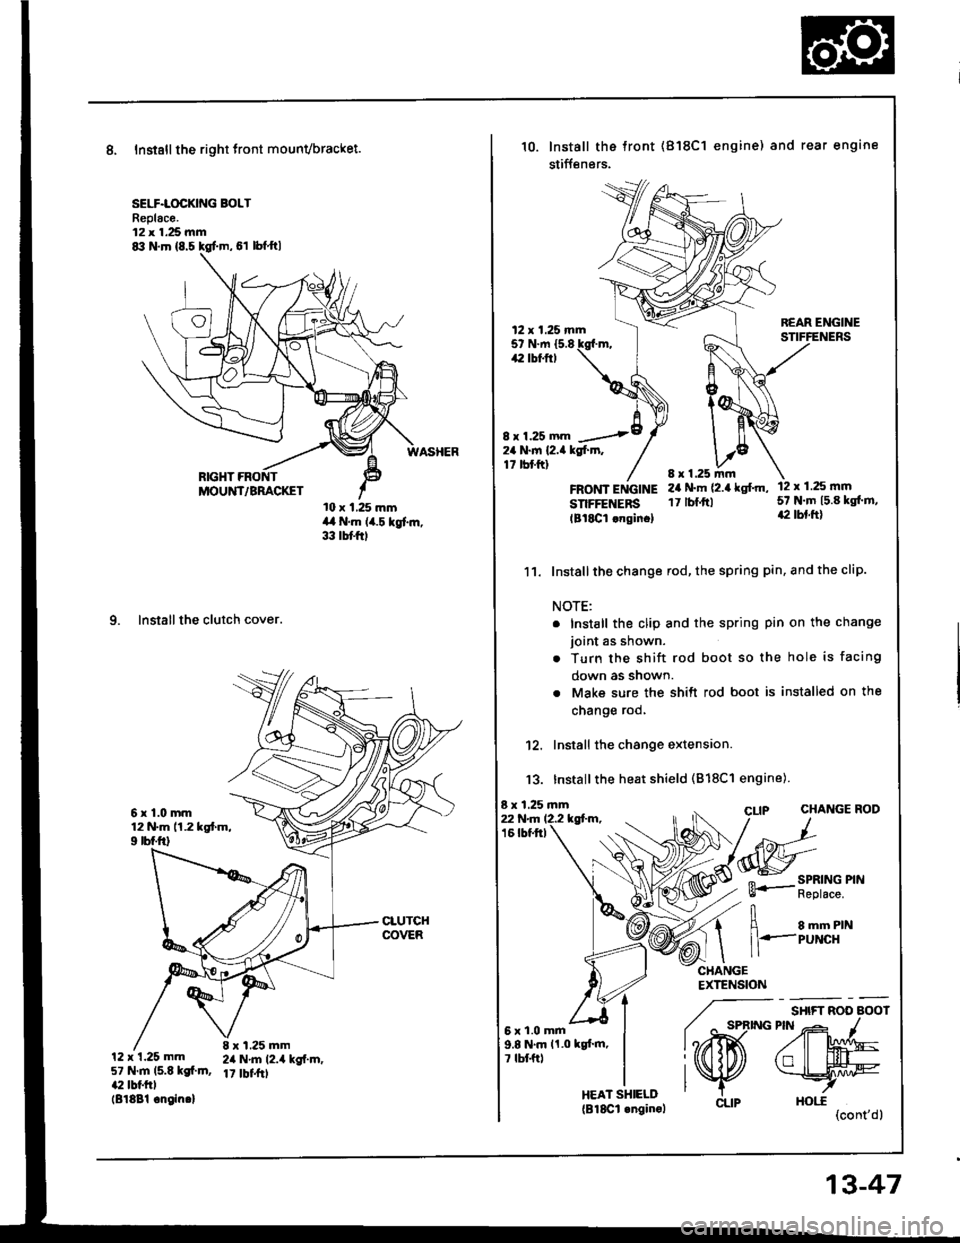 ACURA INTEGRA 1994  Service User Guide 8, Instsll the right tront mounvbracket.
SELF.LOCKING BOLTReplac€.12 x 1.25 mm
10 x 1,25 mmil a N.m (i4.5 kgf..n,33 tbtftl
9. Installthe clutch cover.
6r1.0mm12 N.m 11.2 kgtm,9 rbf.ftl
12 x 1.25 mm5